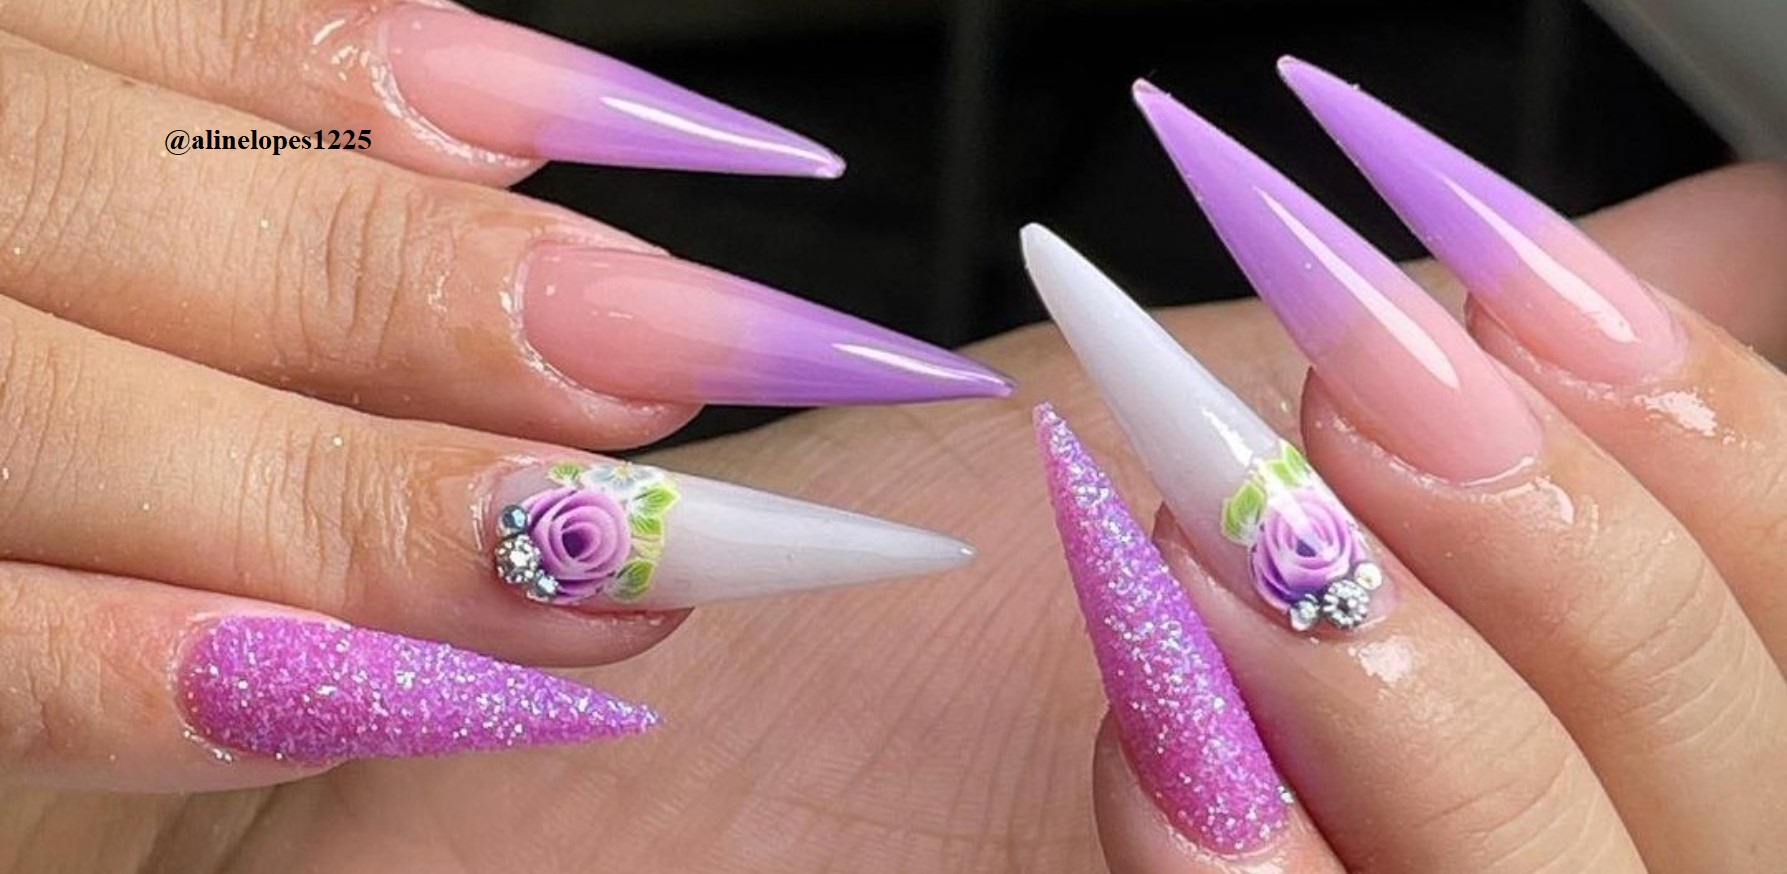 Forget Basic Nail Shapes! Up Your Nail Game With These Stiletto Glam Nails